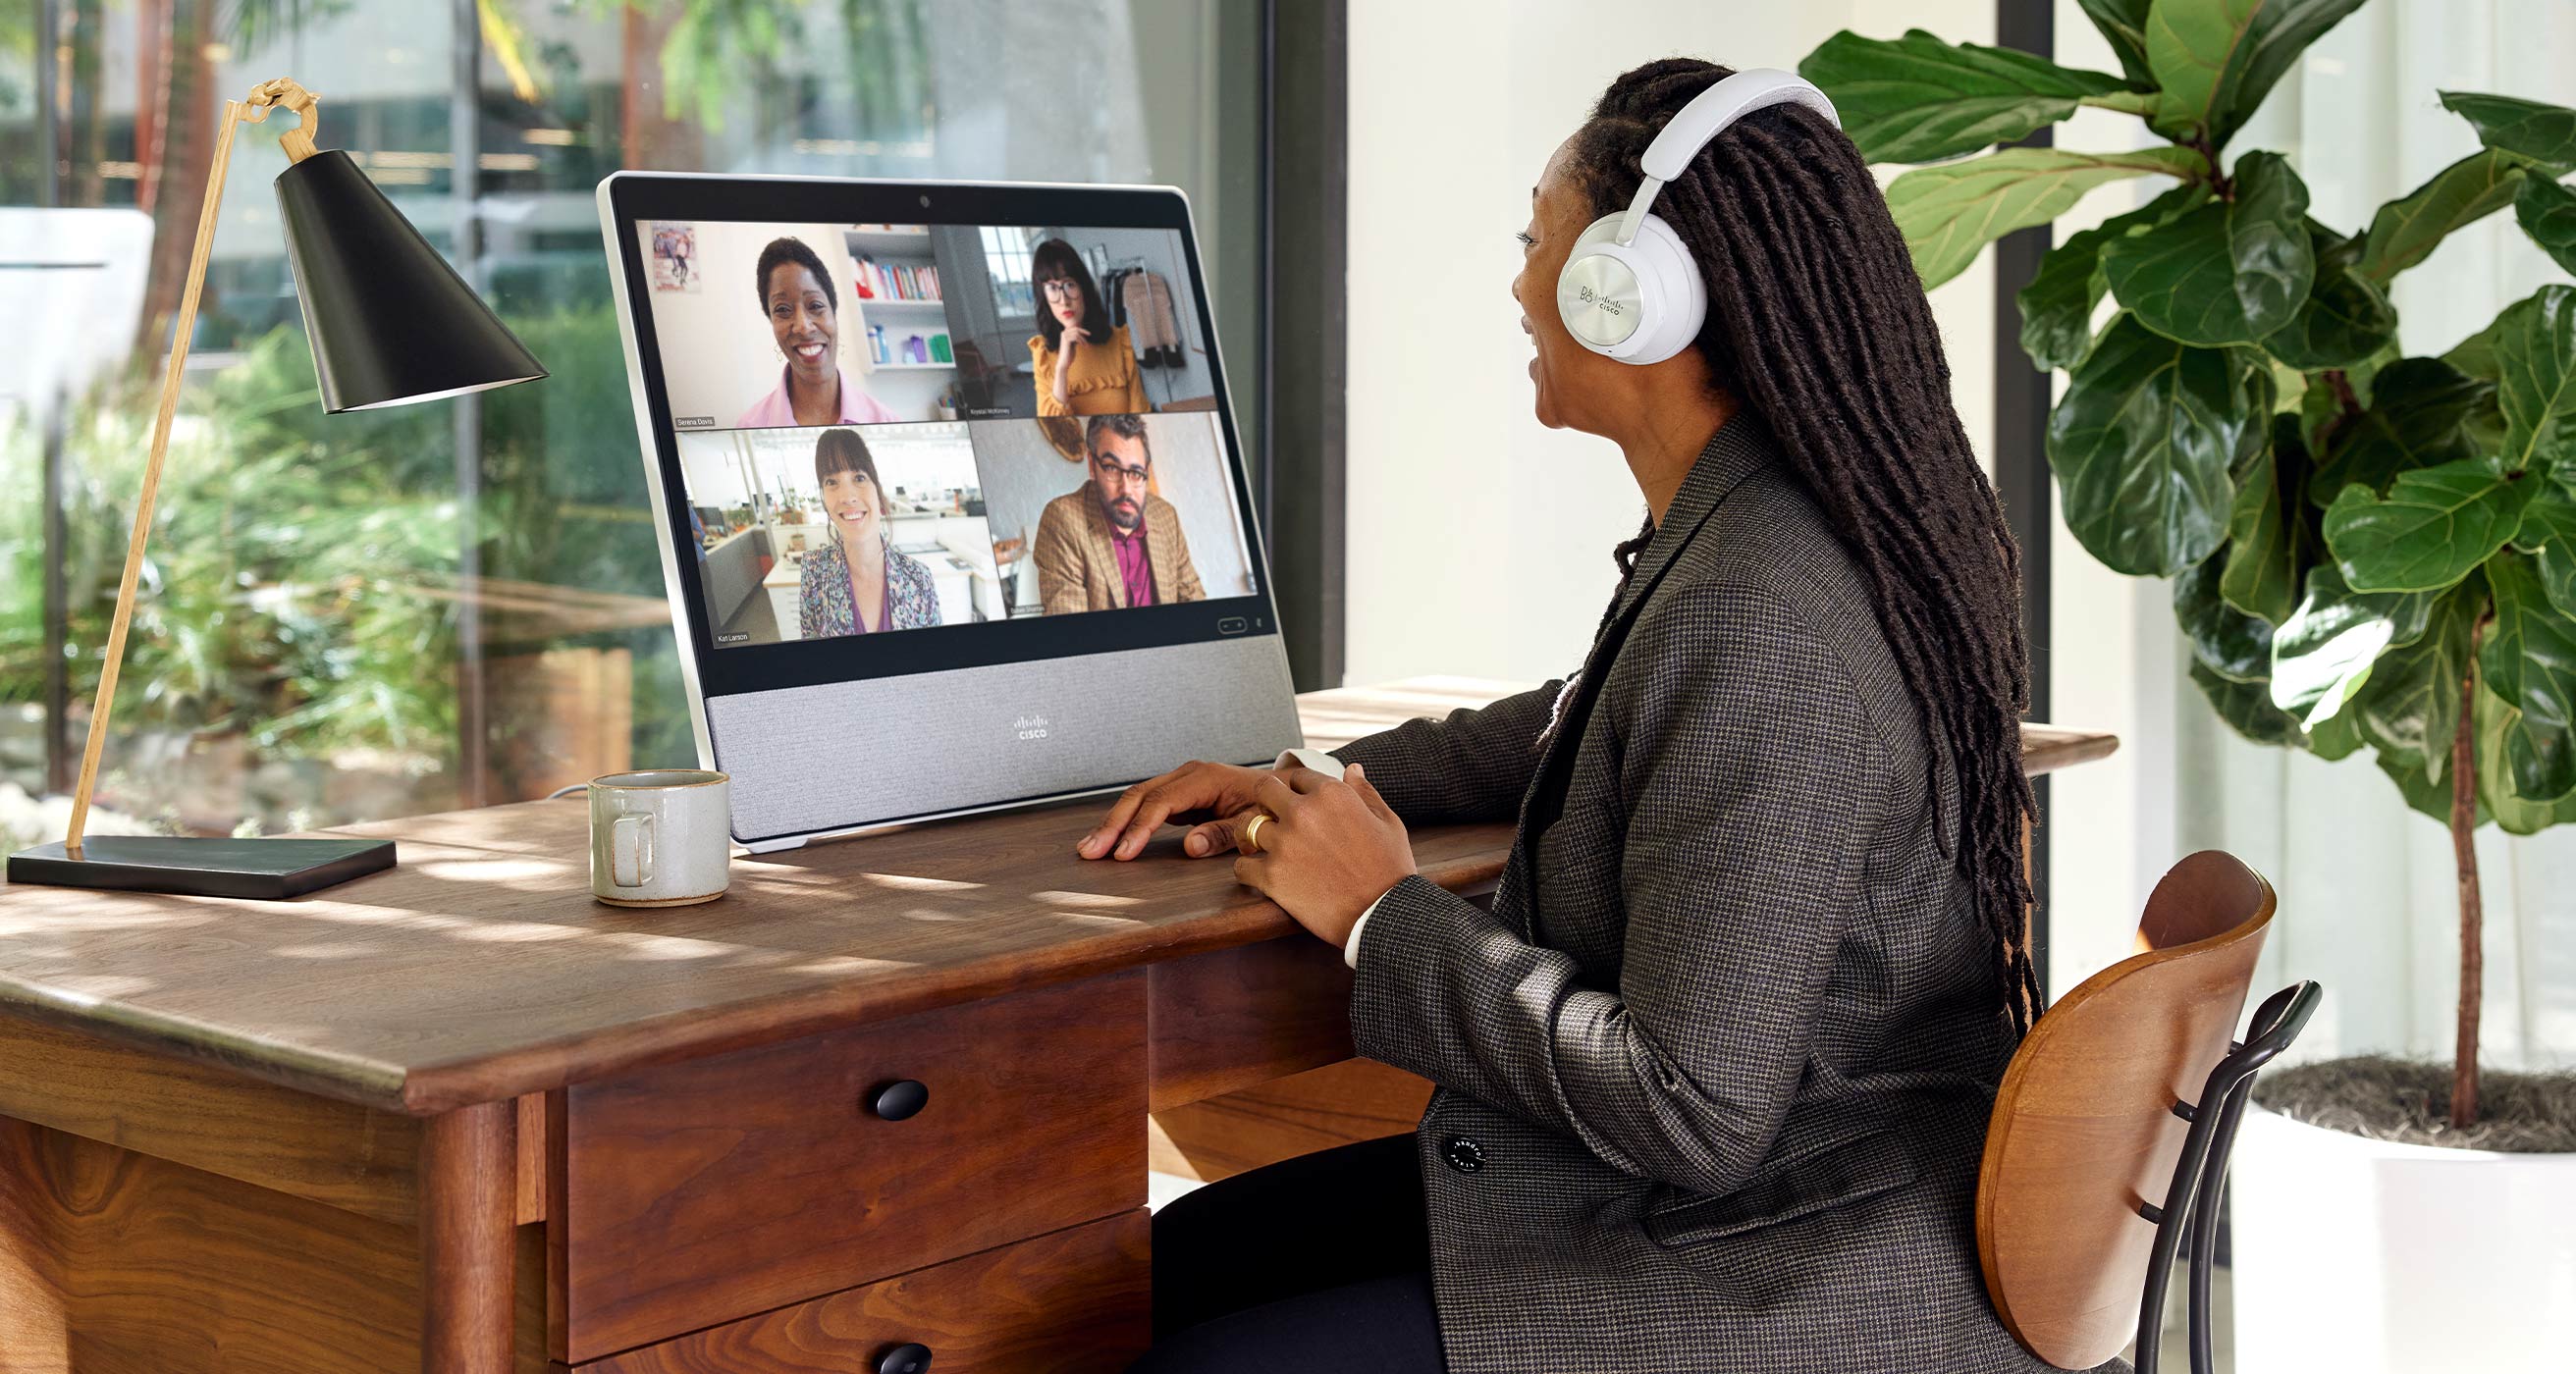 Remote worker uses Cisco Desk Pro for video conference on Microsoft Teams.